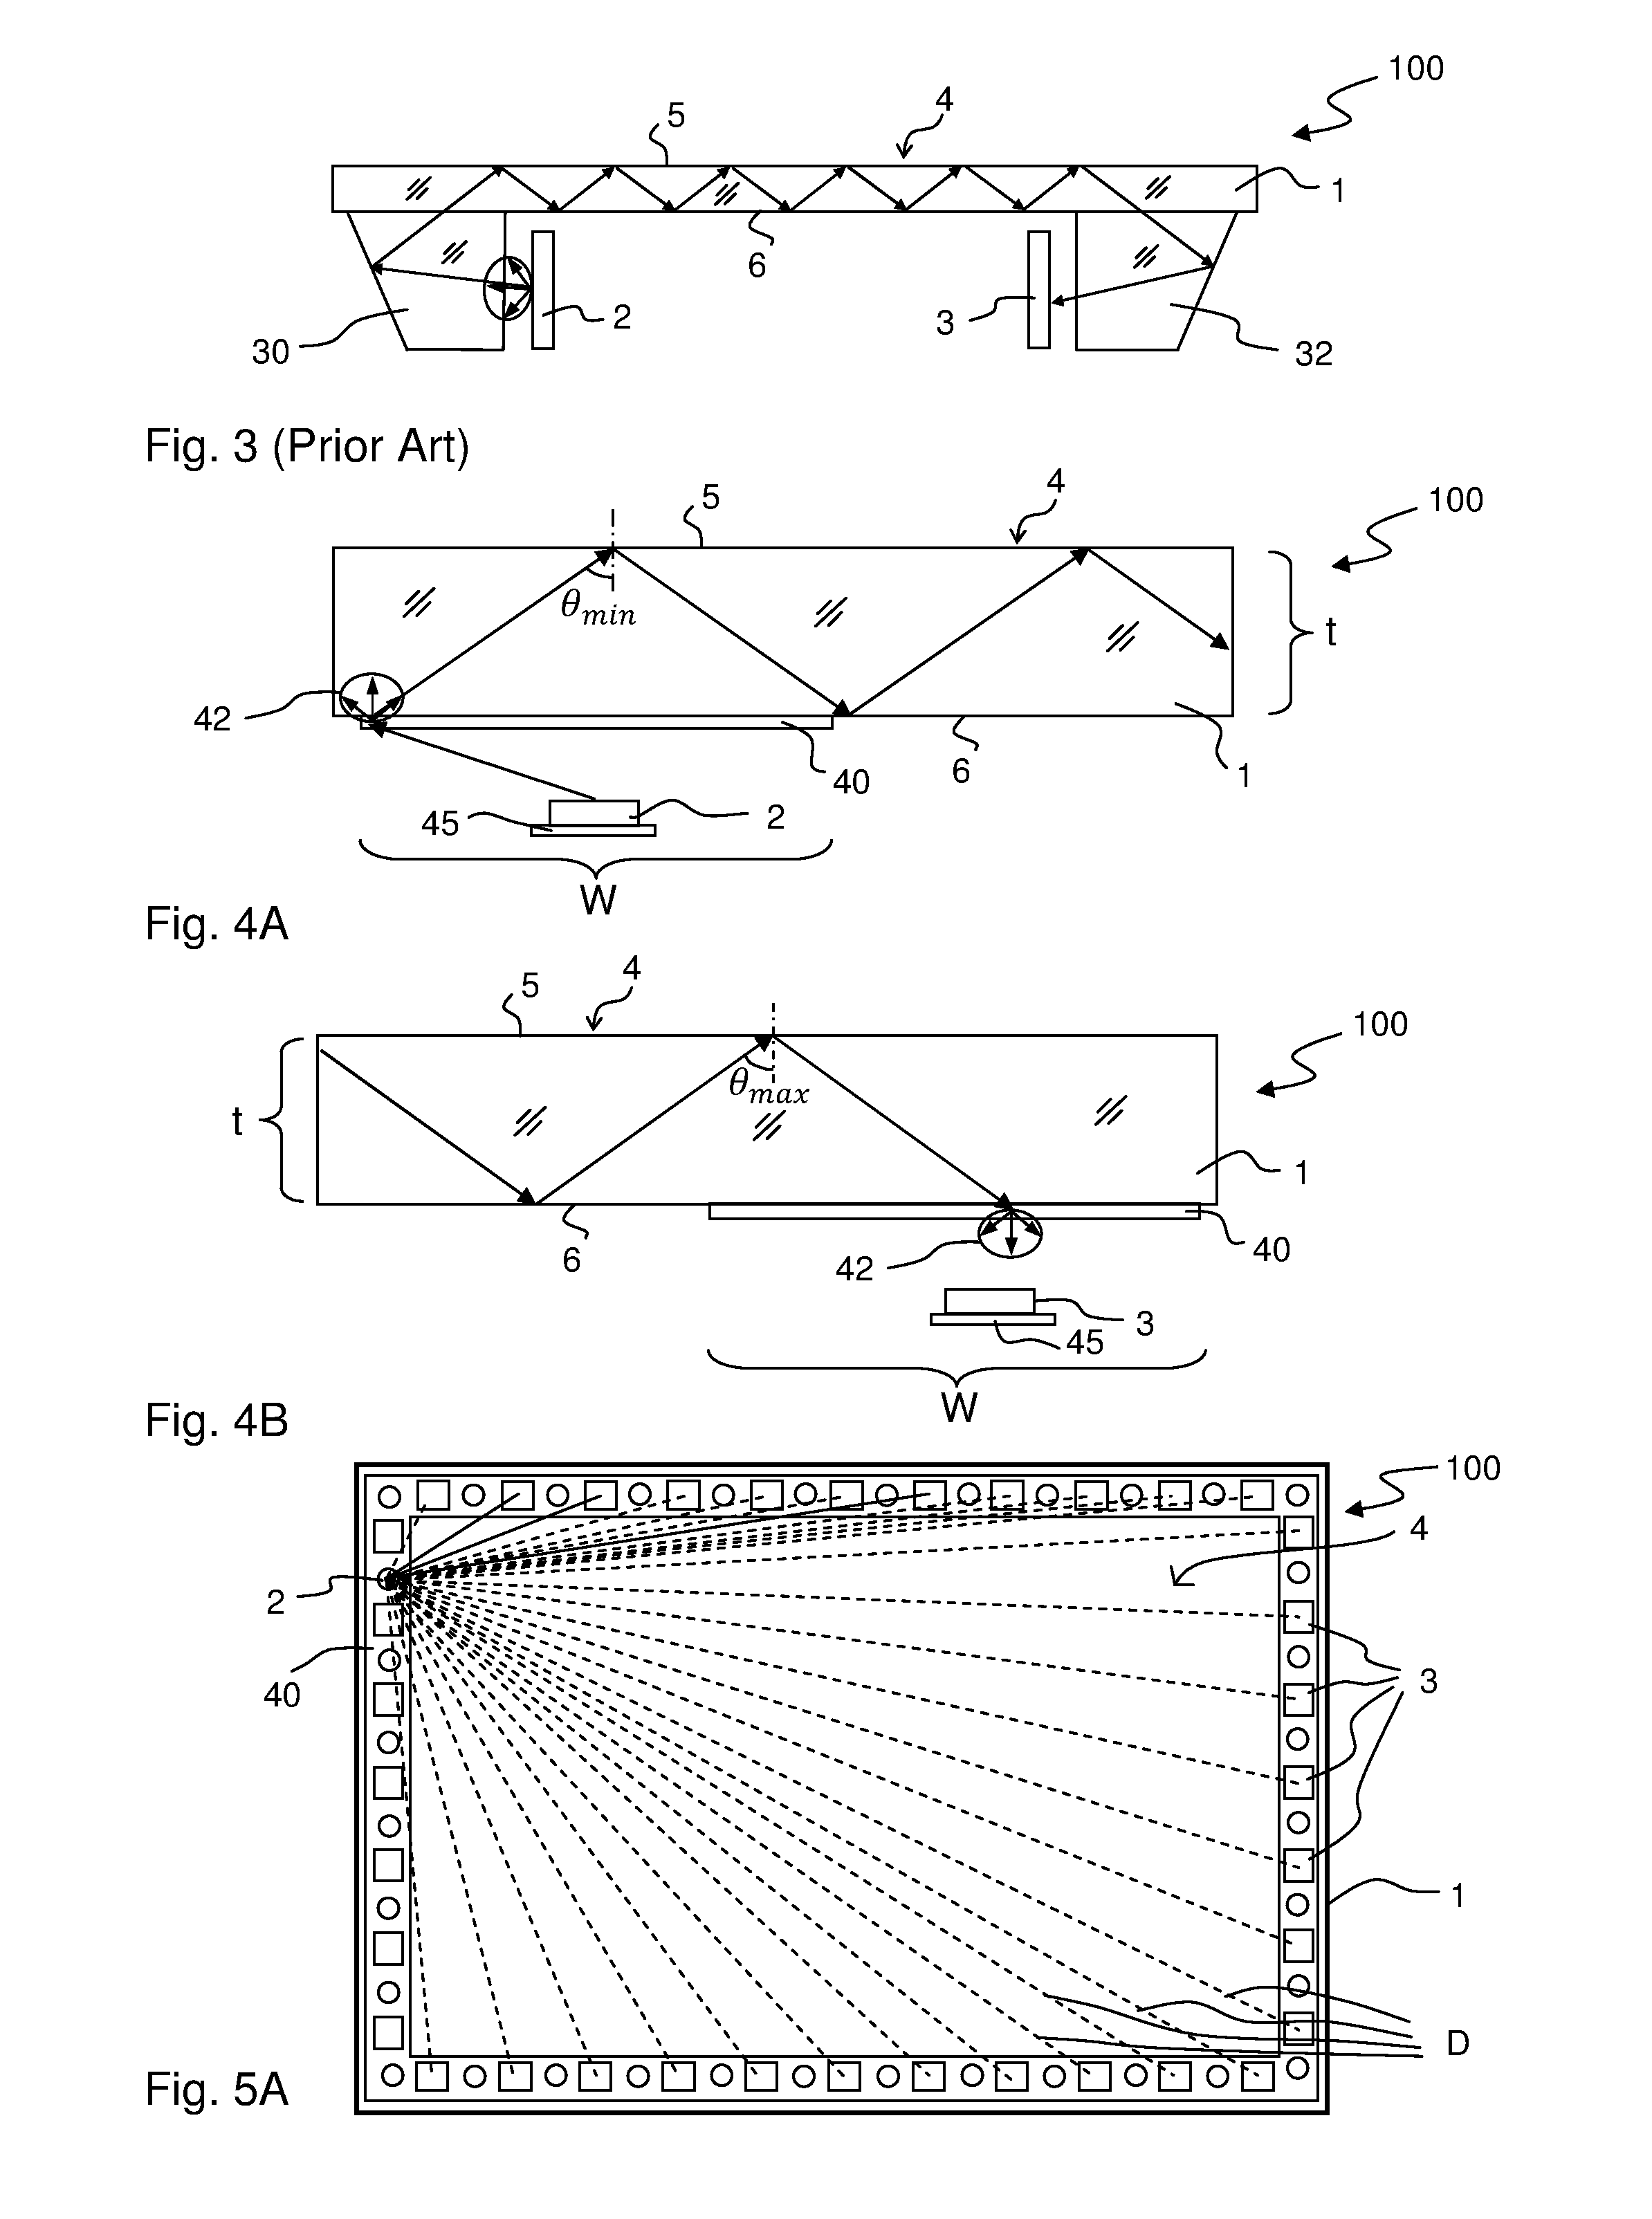 Optical coupling in touch-sensing systems using diffusively transmitting element